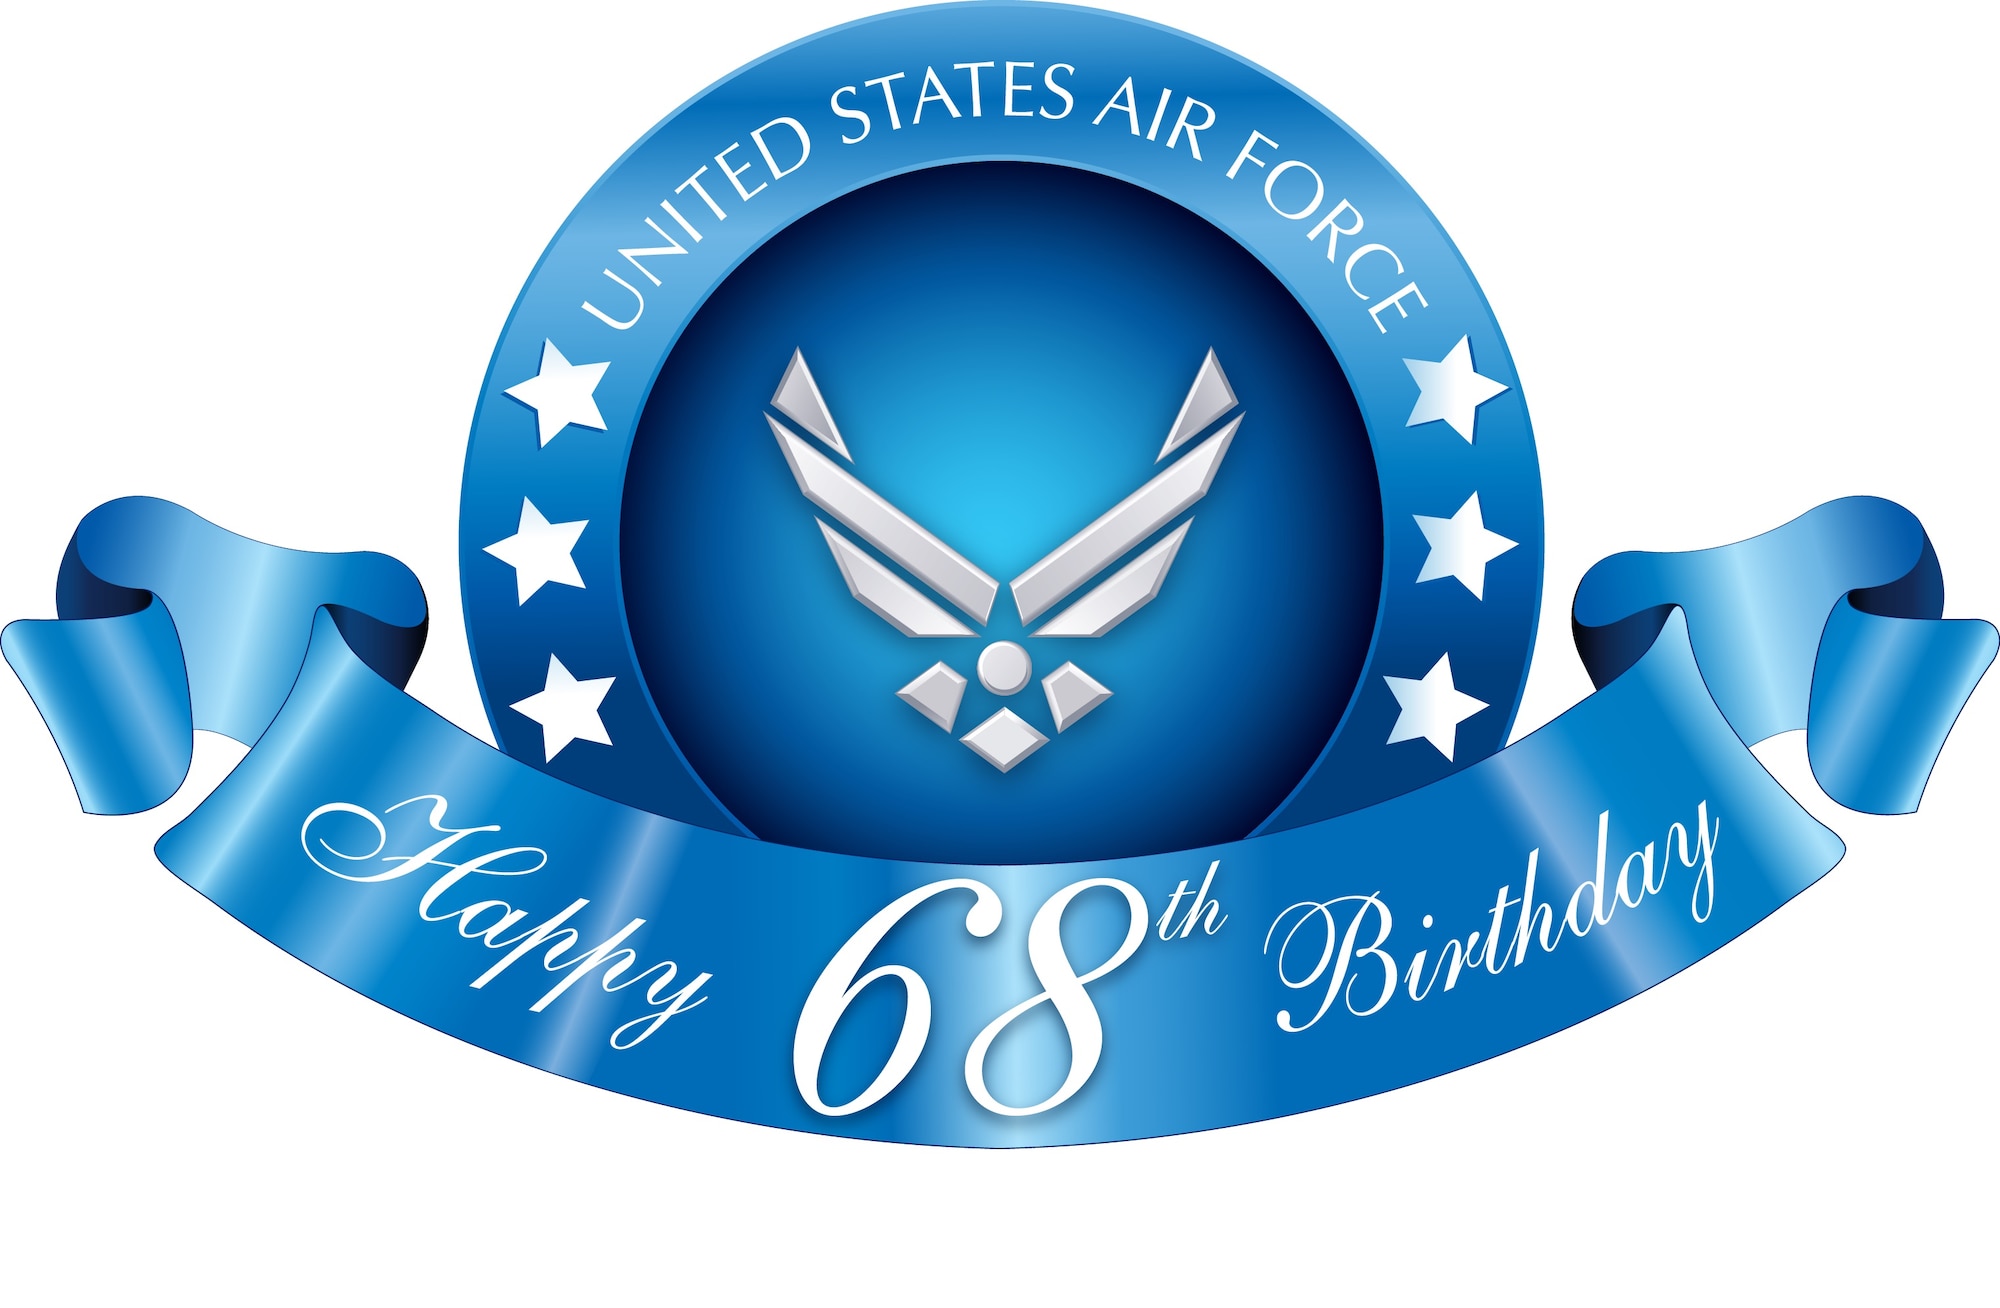 The United States Air Force celebrates 68 years on Sept. 18, 2015.